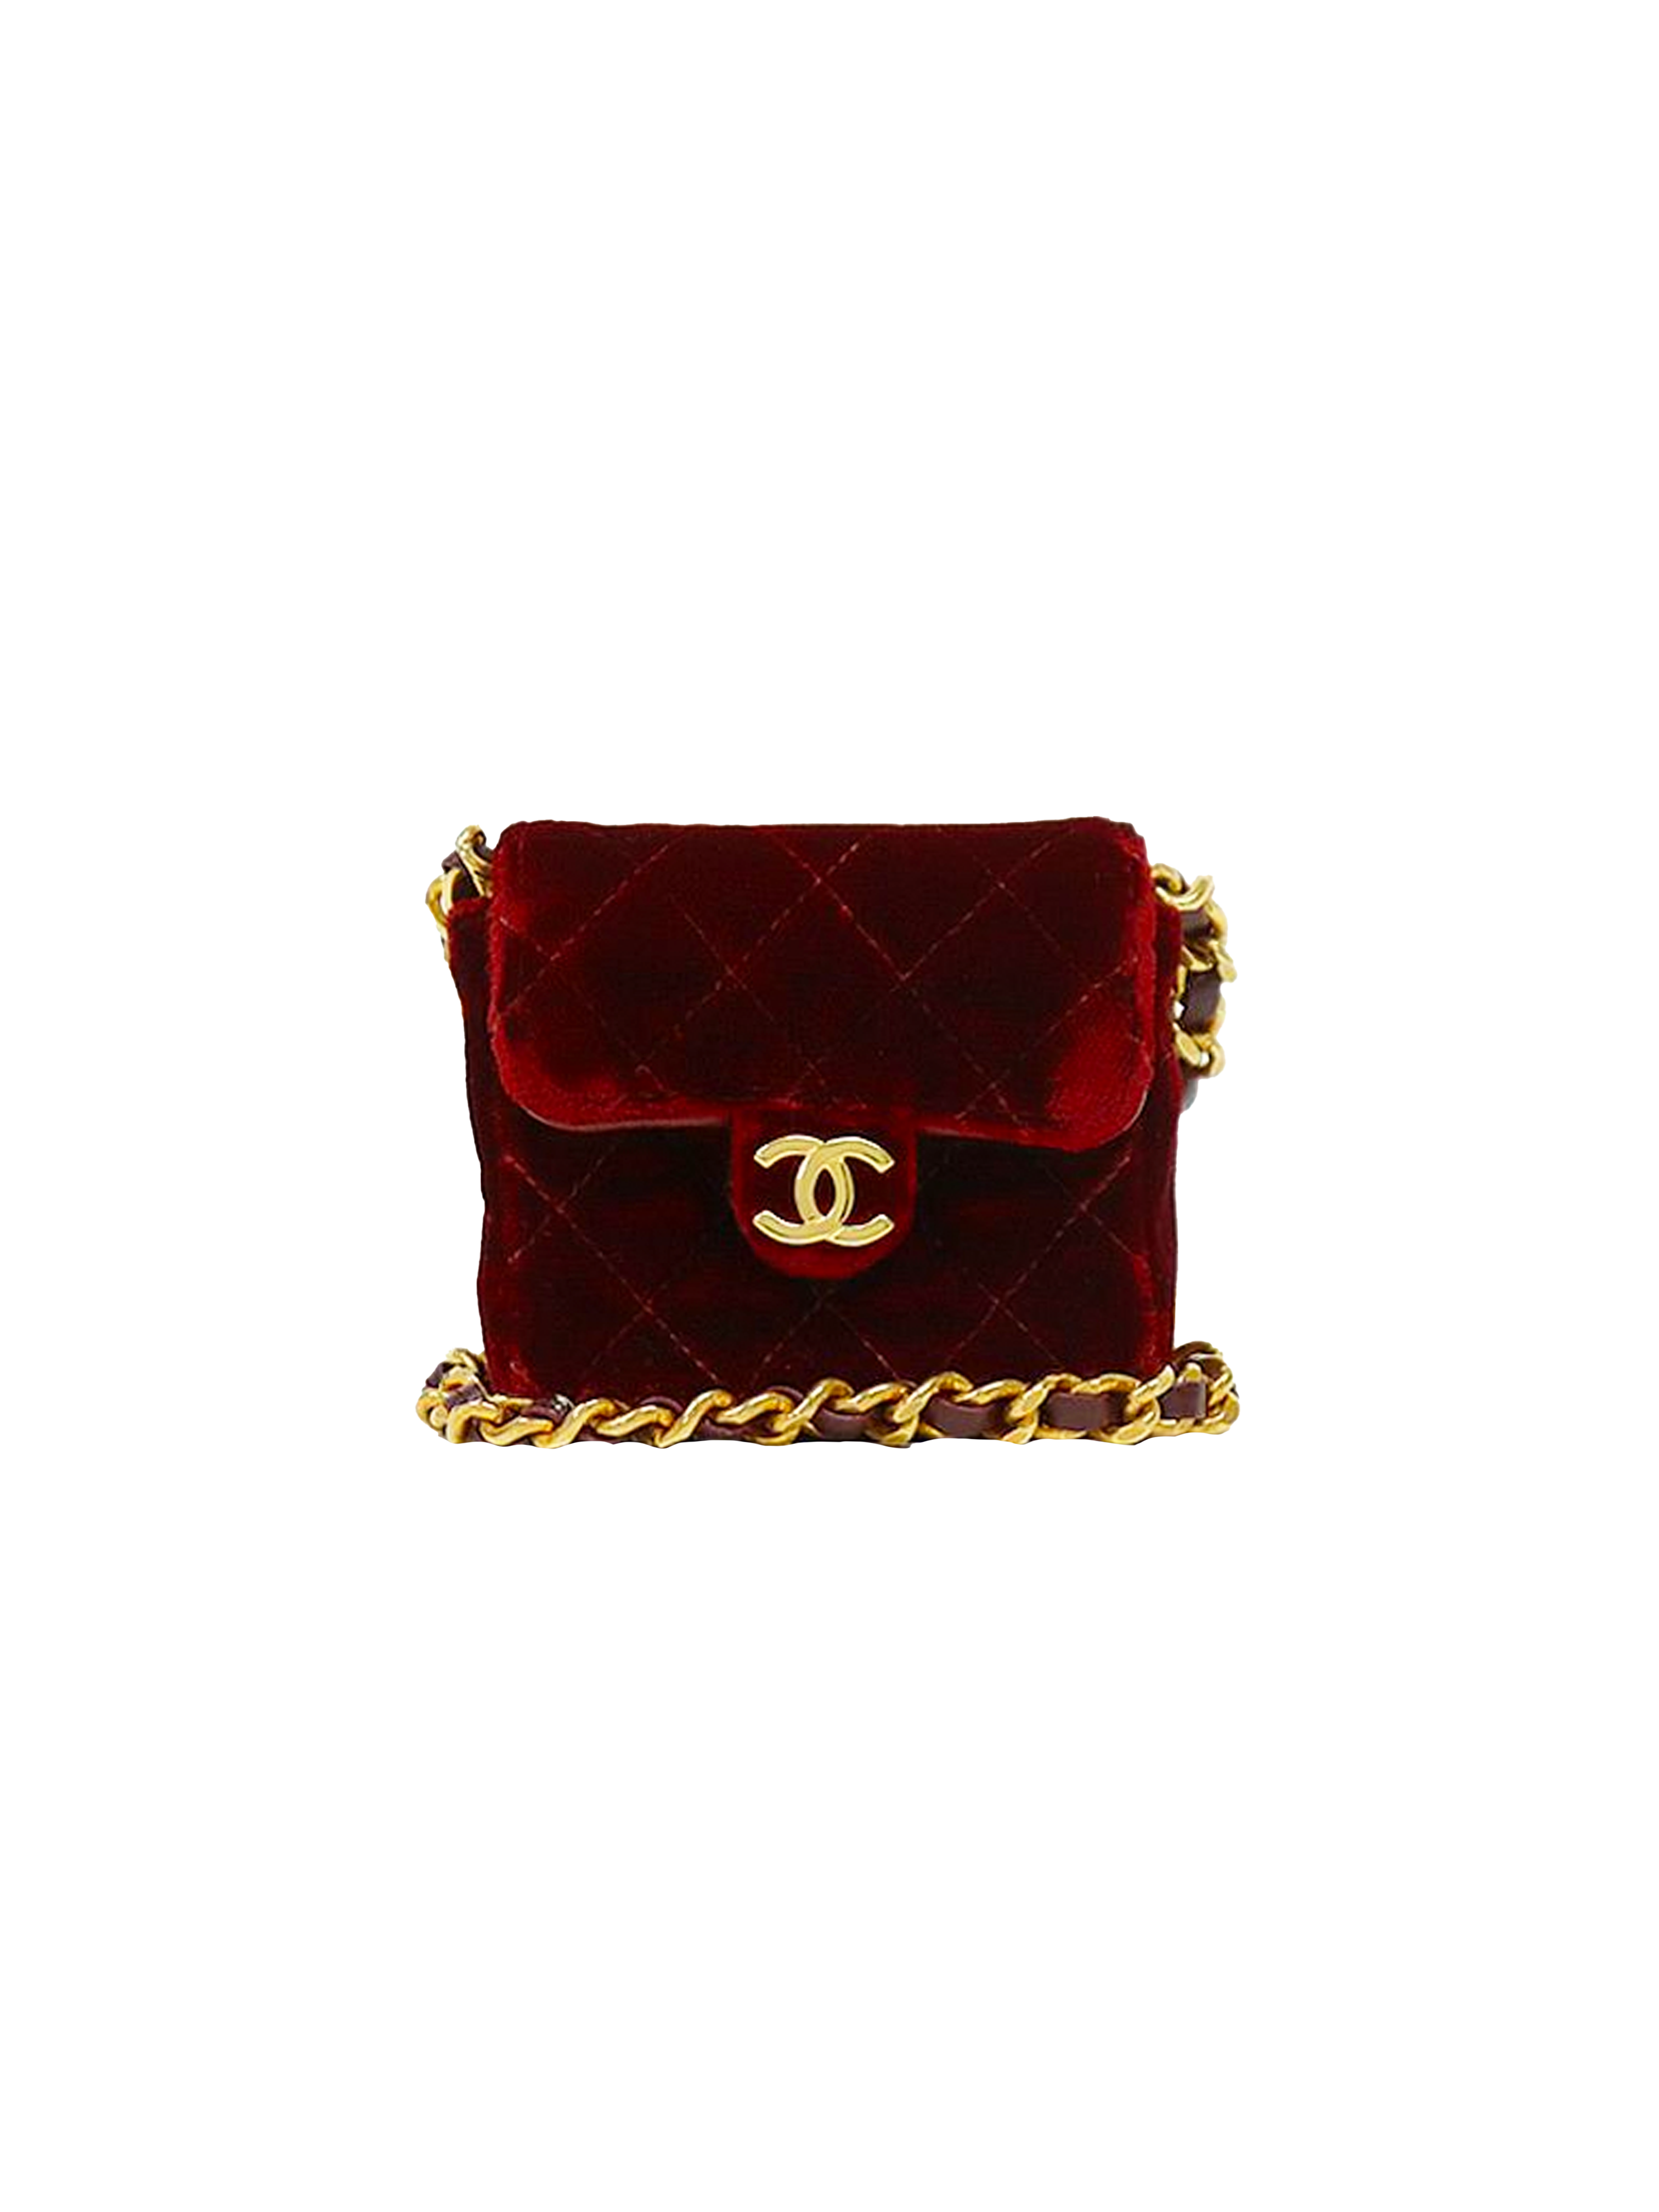 Chanel Around 1990 Made Suede V Stitch Classic Flap Chain Bag 25cm Red